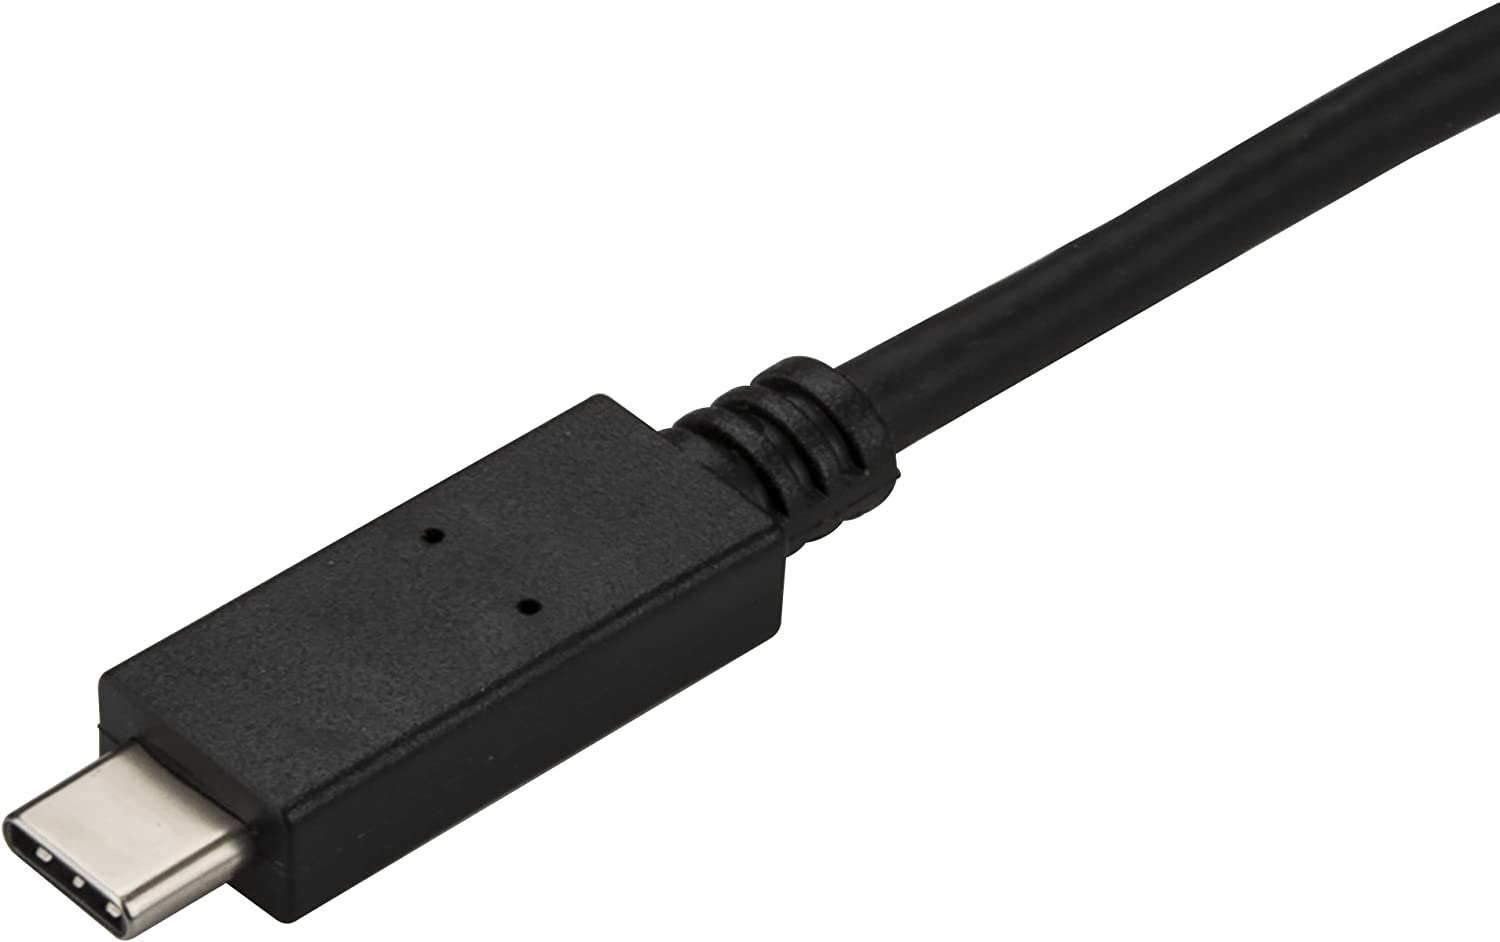 StarTech USB C TO DISPLAYPORT CABLE(CDP2DPMM3MB) - Win-Pro Consultancy Pte Ltd